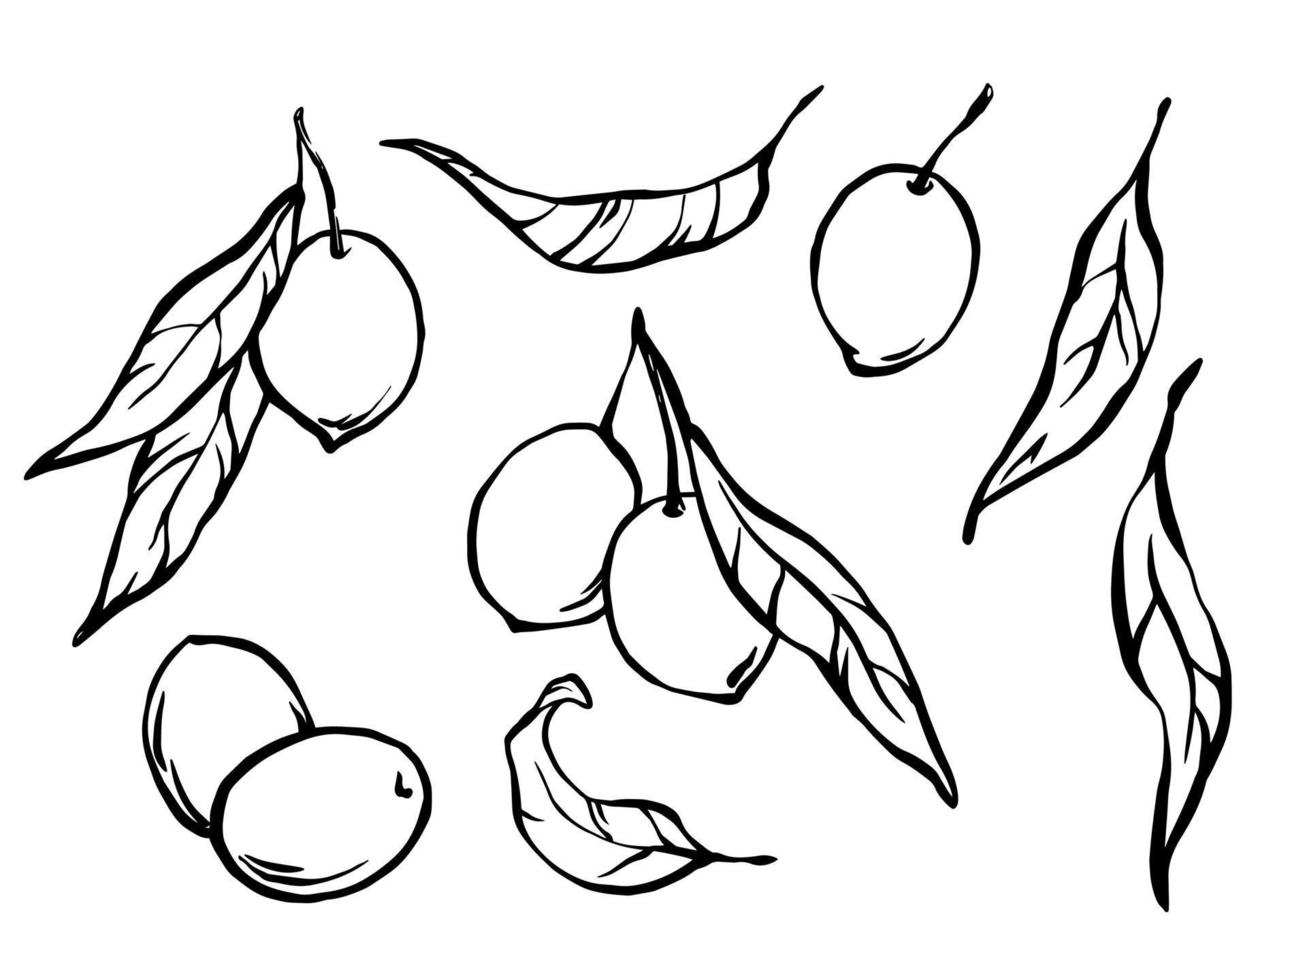 Hand drawn olives black and white vector illustration set. Outline drawing in doodle style. Design elements set for olive oil, natural cosmetics, wrapping.